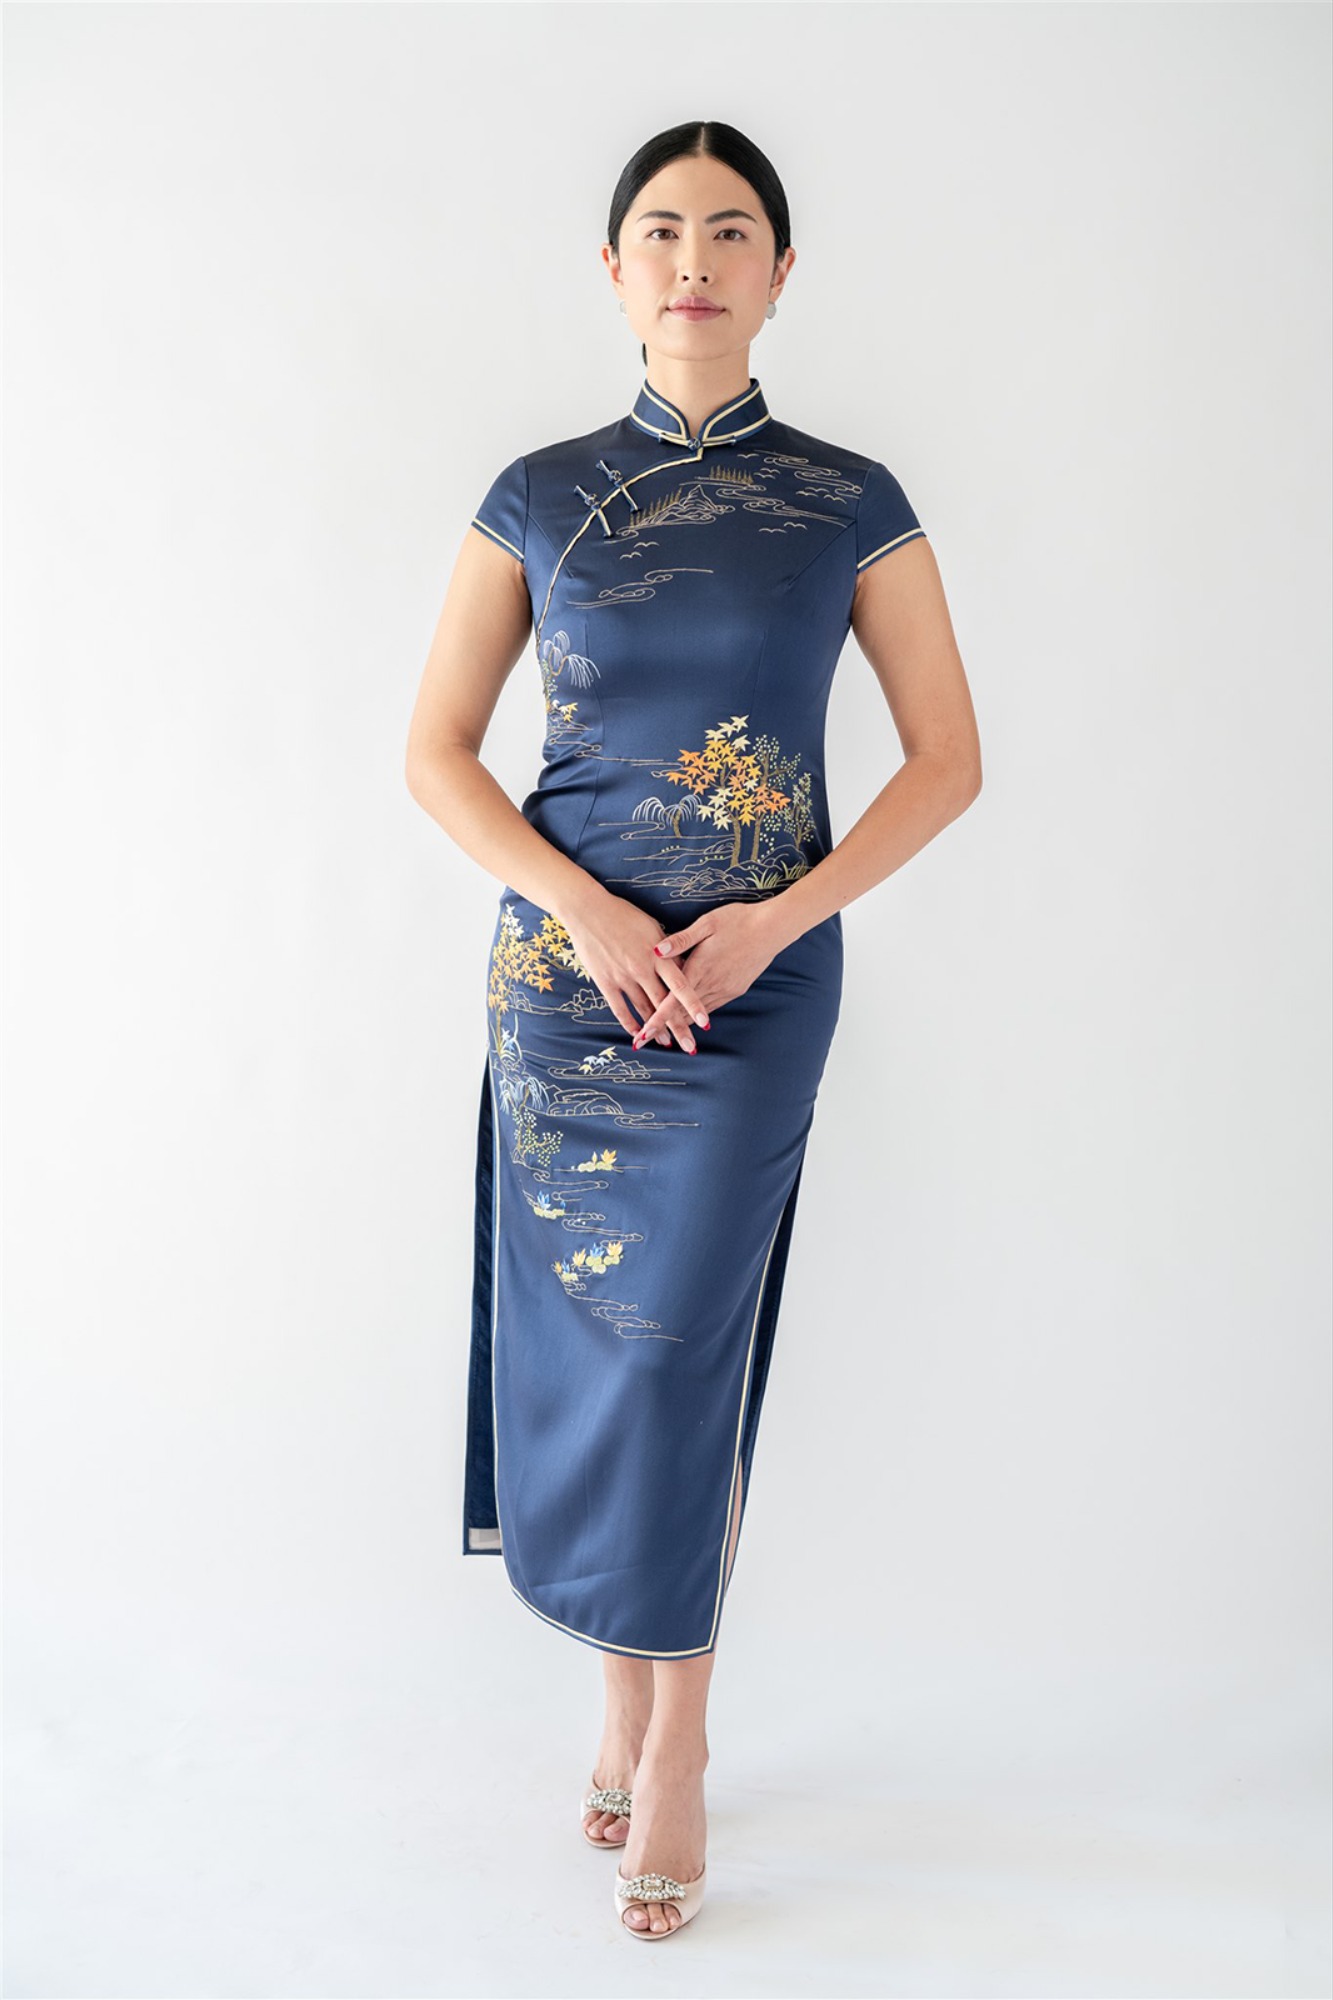 custom Chinese wedding attire designed by Jinza Couture